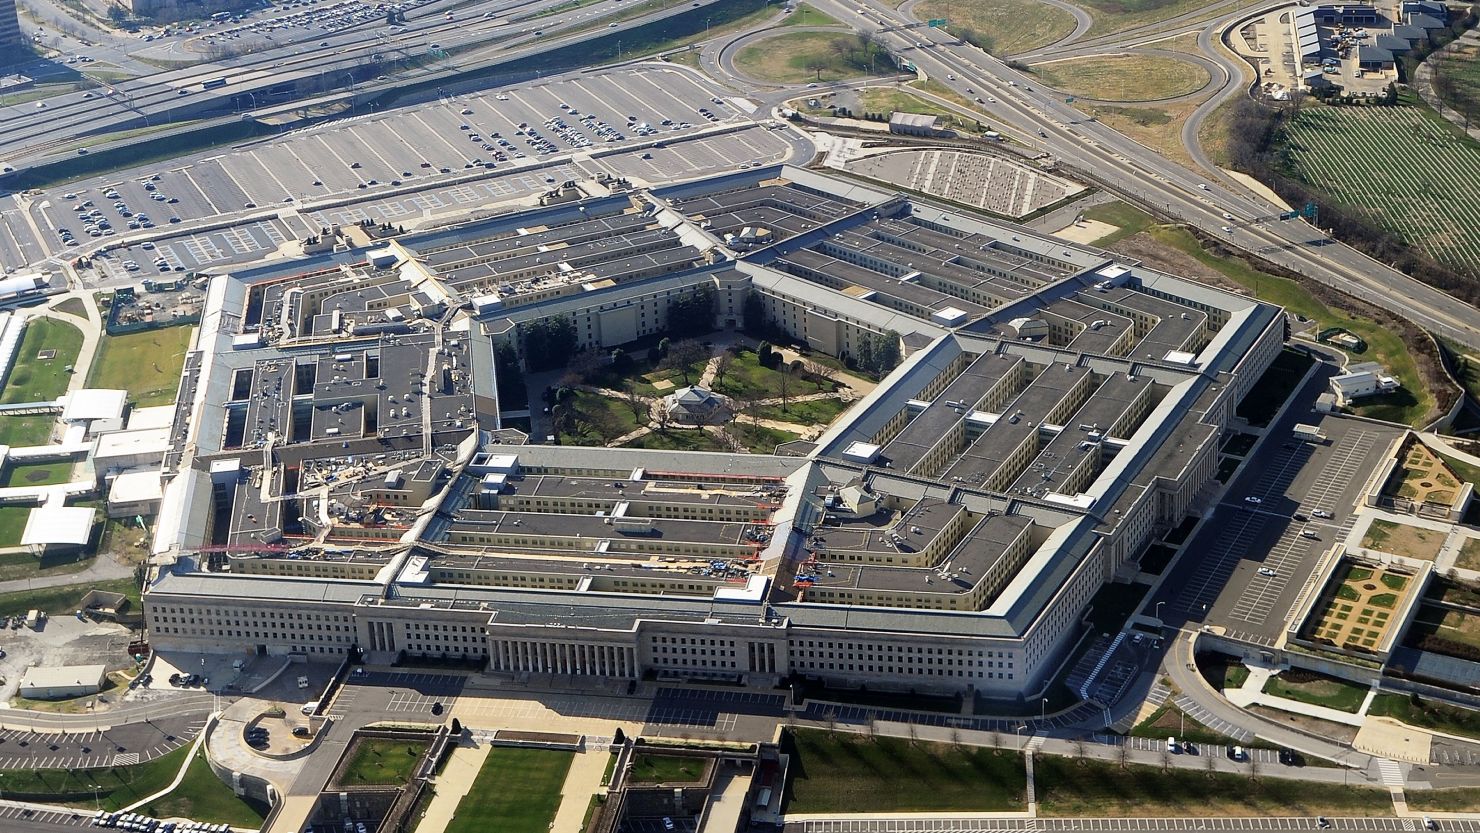 This picture taken shows the Pentagon building in Washington, DC.  